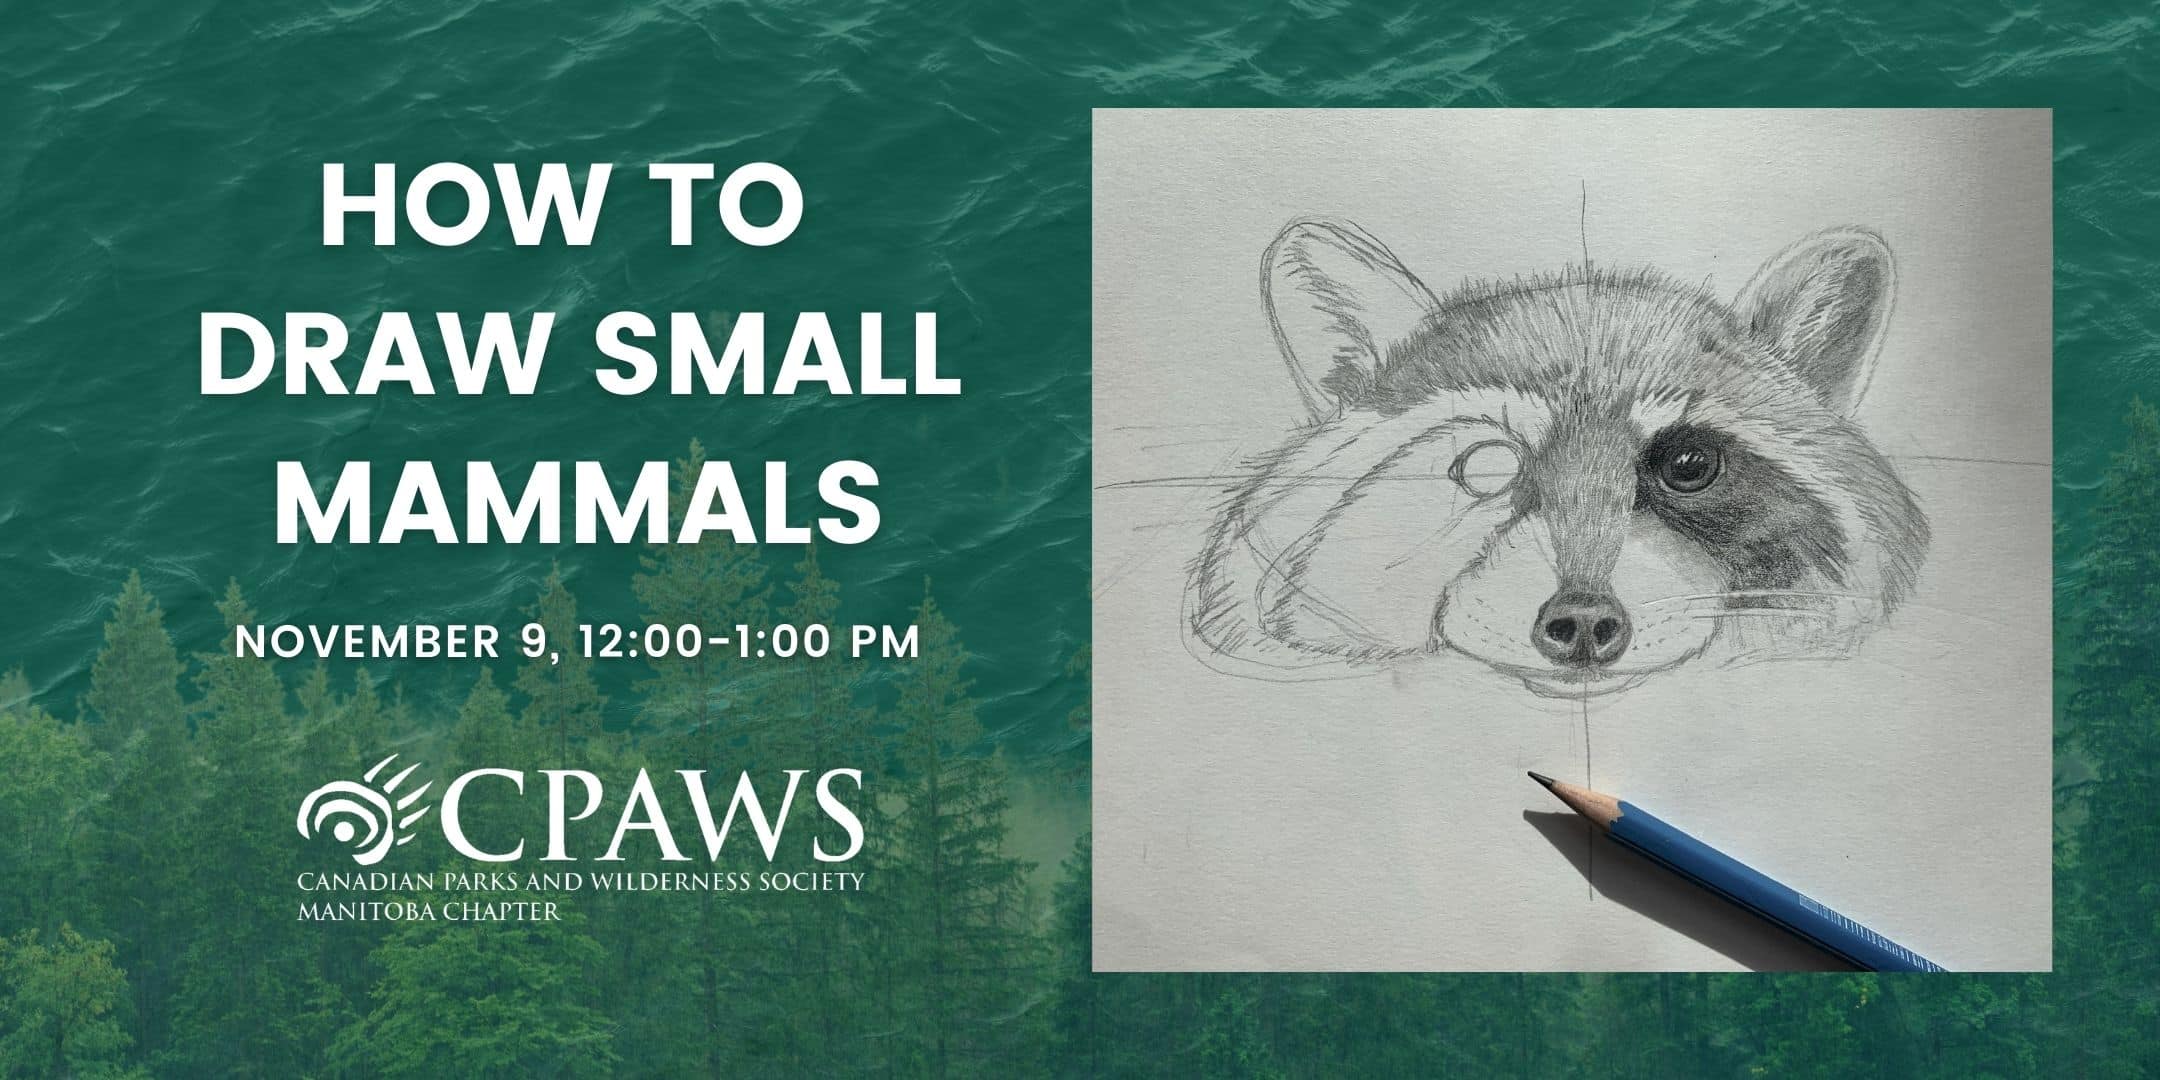 Webinar hosted by CPAWS Manitoba designed to teach attendants to draw small mammals.